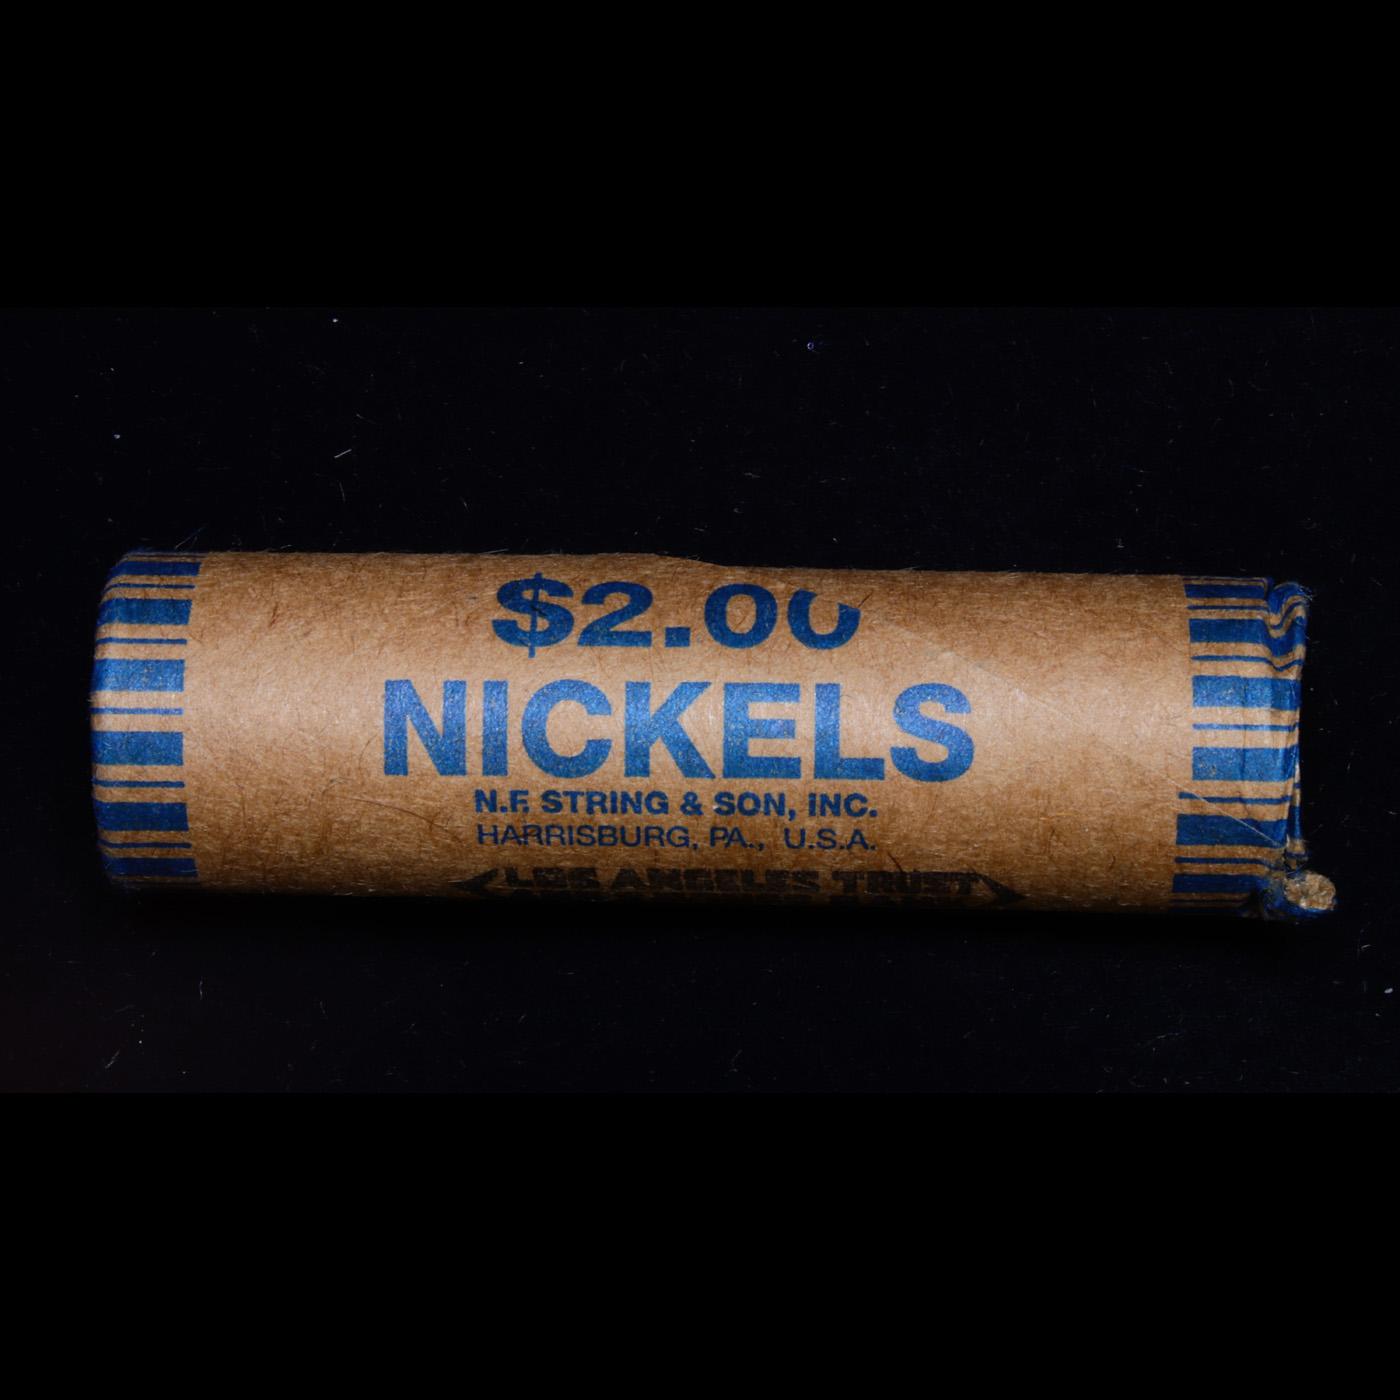 Buffalo Nickel Shotgun Roll in Old Bank Style 'Los Angeles Trust And Savins Bank'  Wrapper 1919 & d